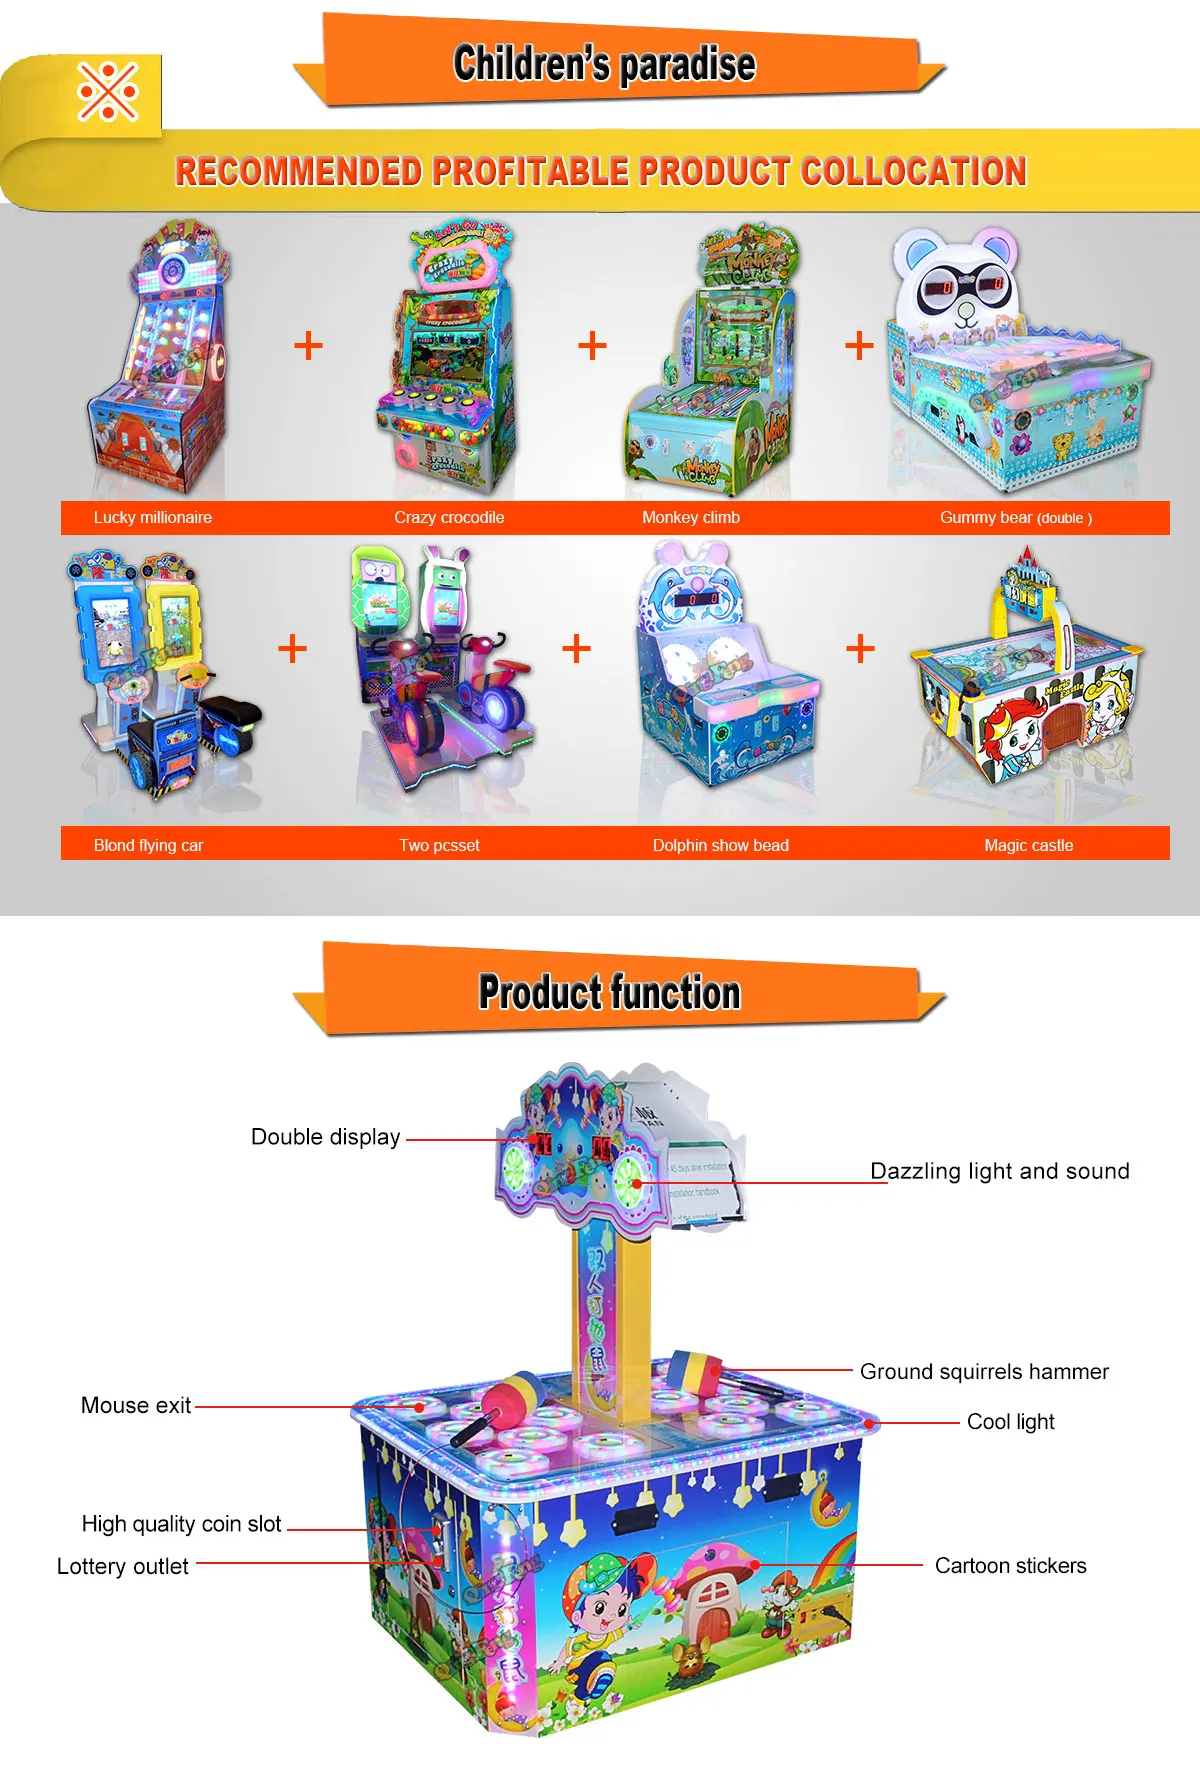 Qingfeng 2017 canton fair double play hit hammer hamster indoor coin operated lottery game machine